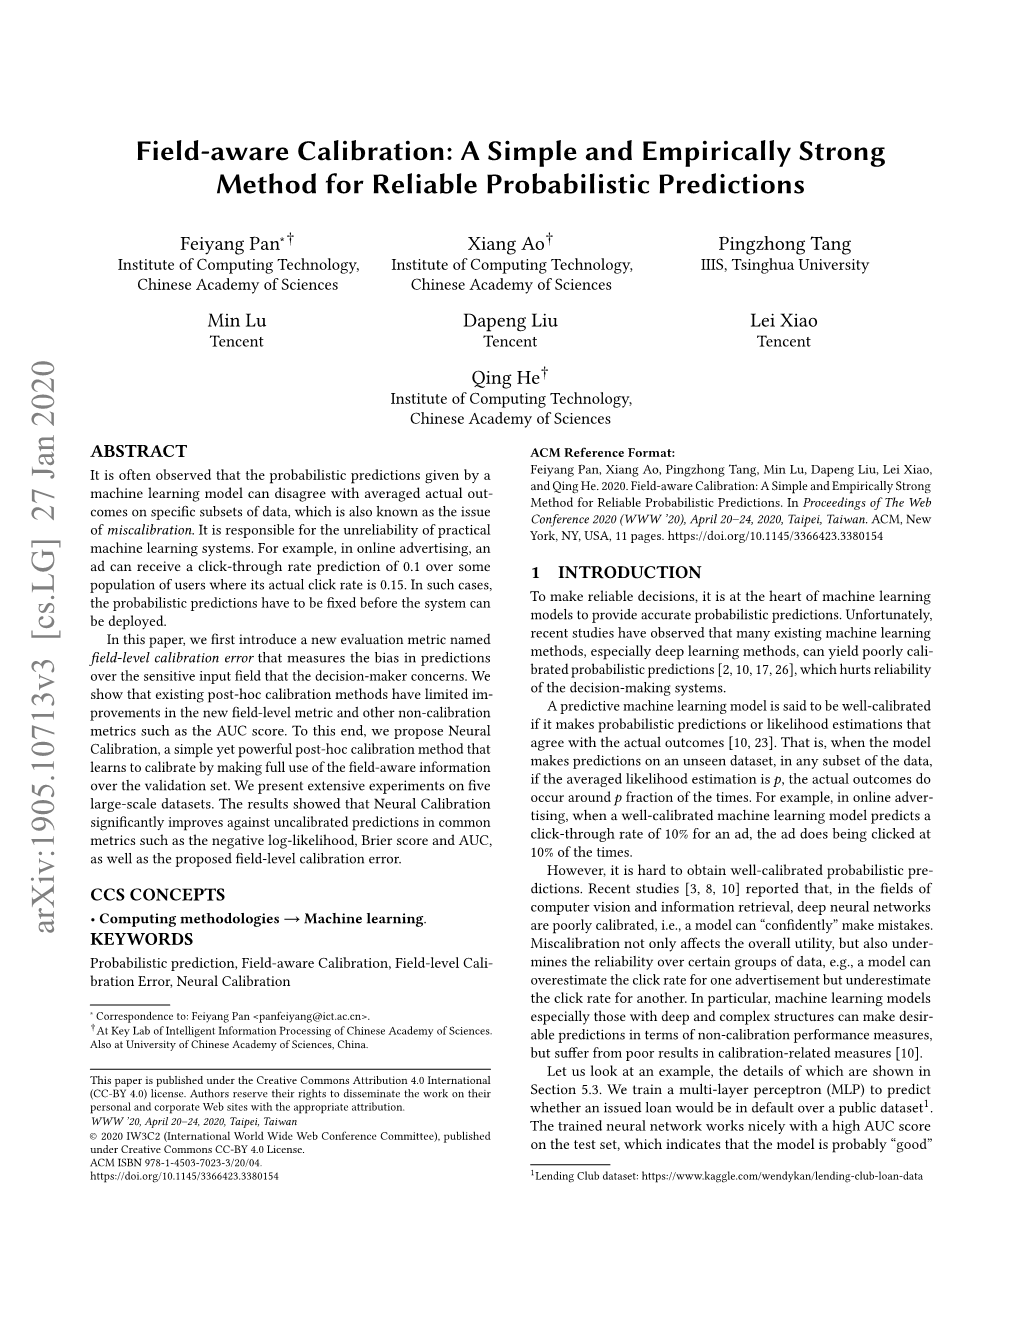 Field-Aware Calibration: a Simple and Empirically Strong Method for Reliable Probabilistic Predictions